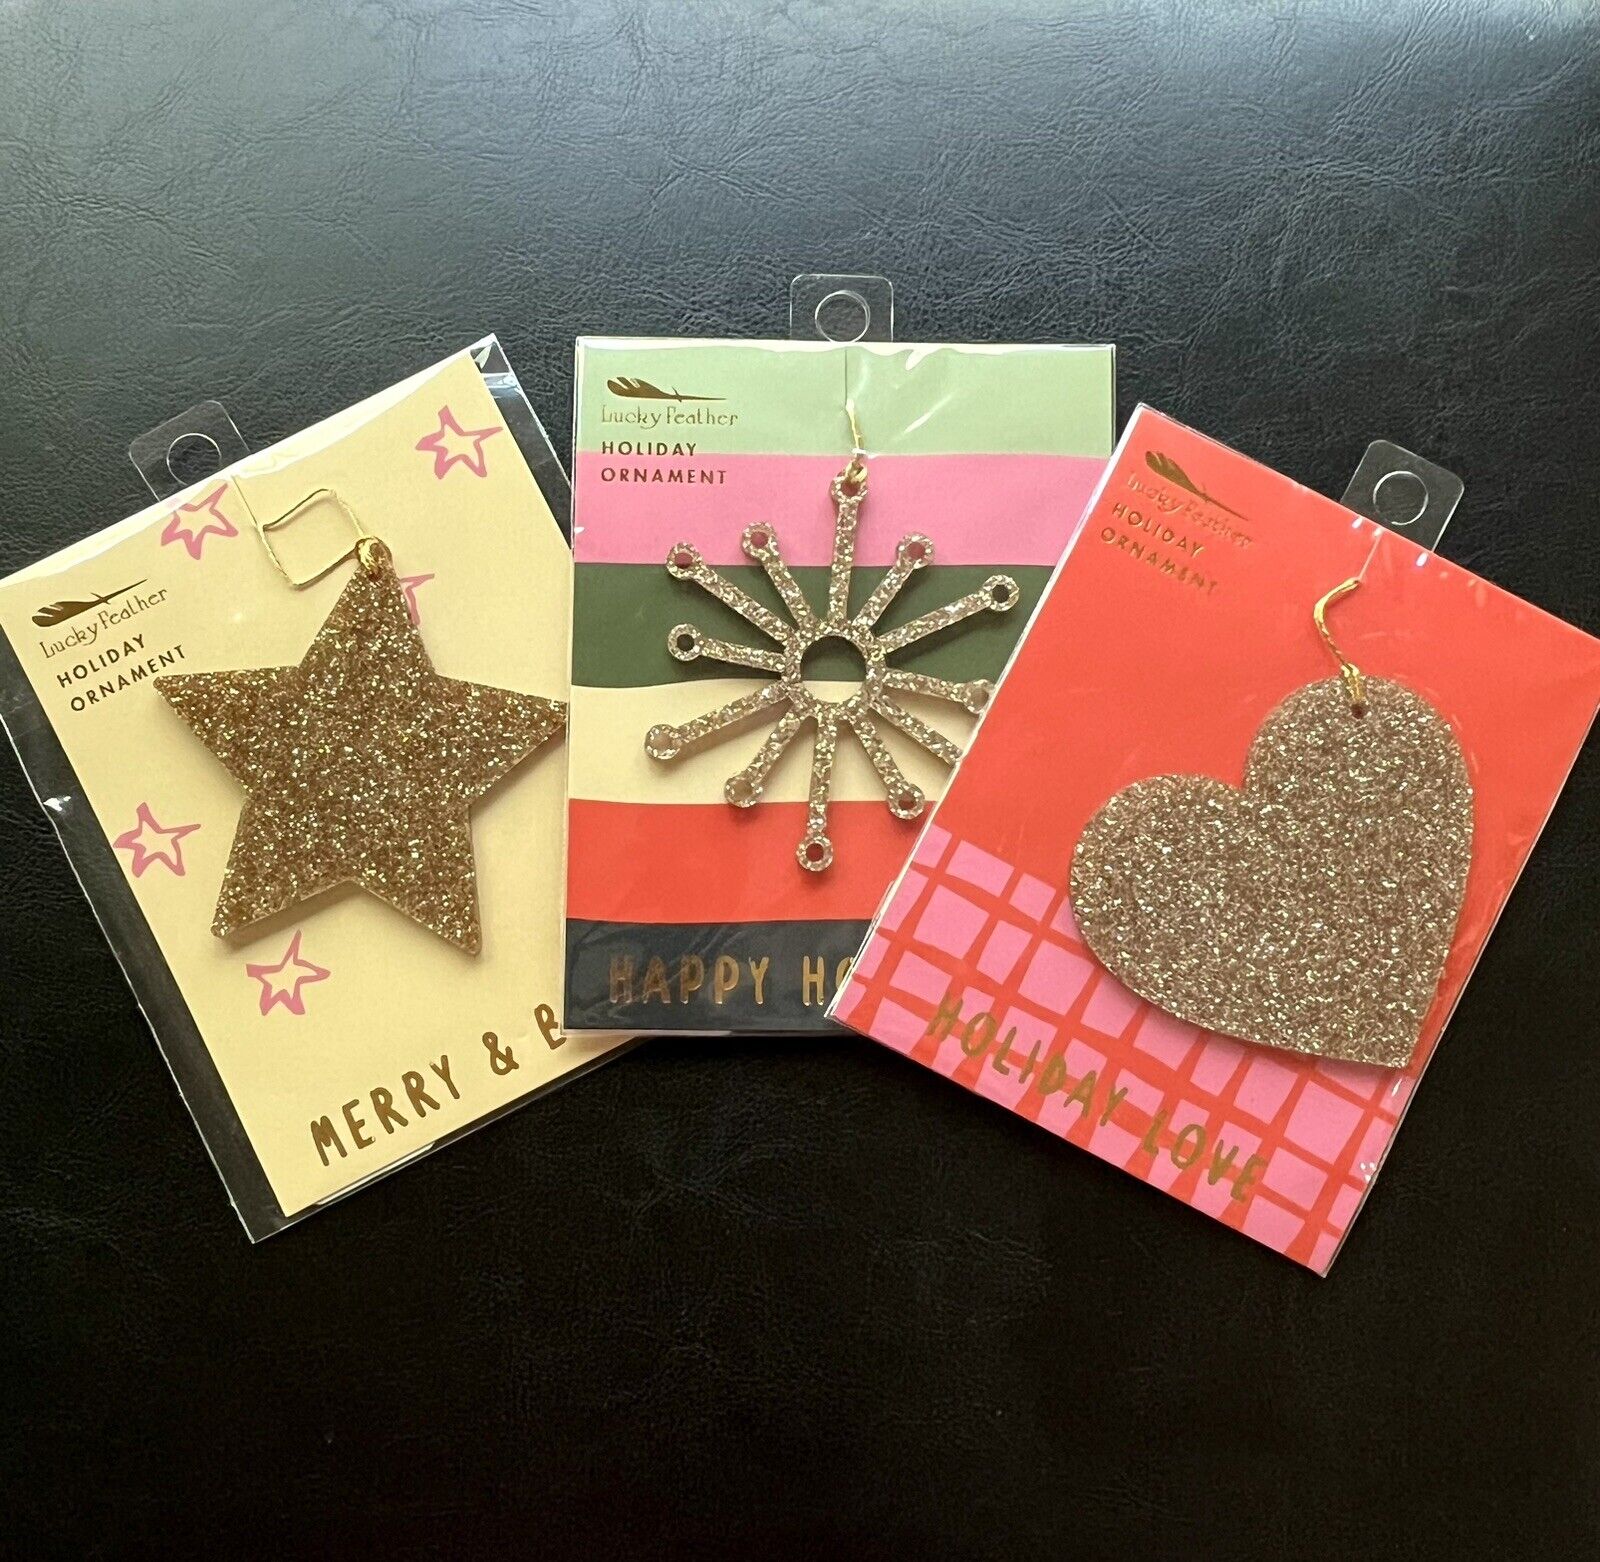 3 Lucky Feather Gold Glitter Holiday Christmas Ornaments : STAR HEART SNOWFLAKE